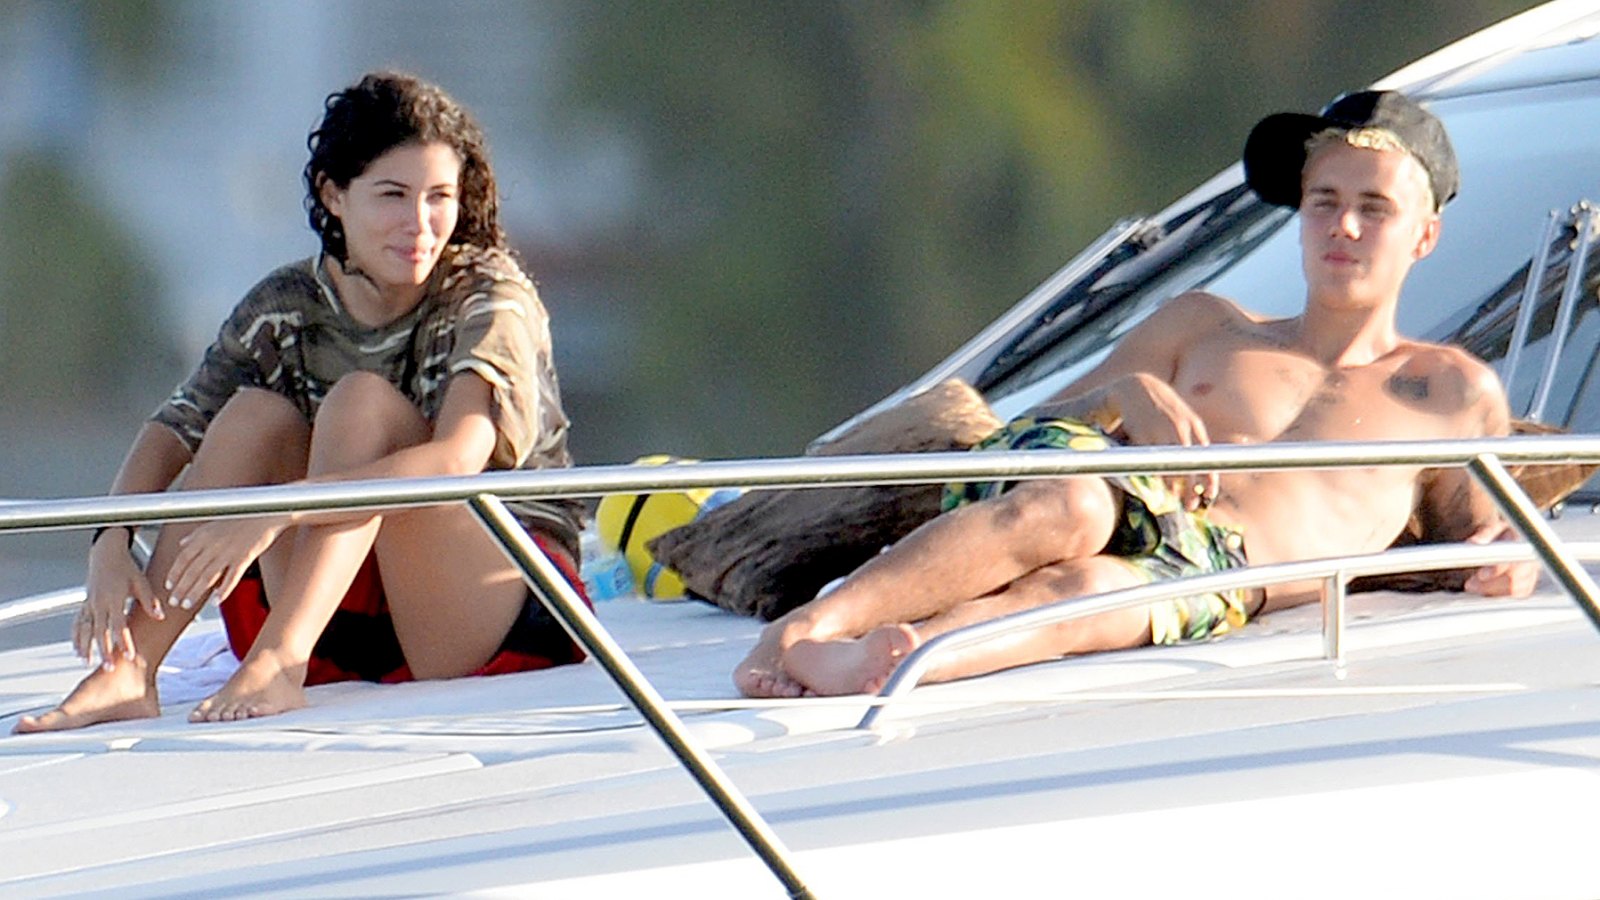 Justin Bieber is seen with model Alexandra Rodriguez as he spends the day on his yacht in Miami, Florida on July 5, 2016.